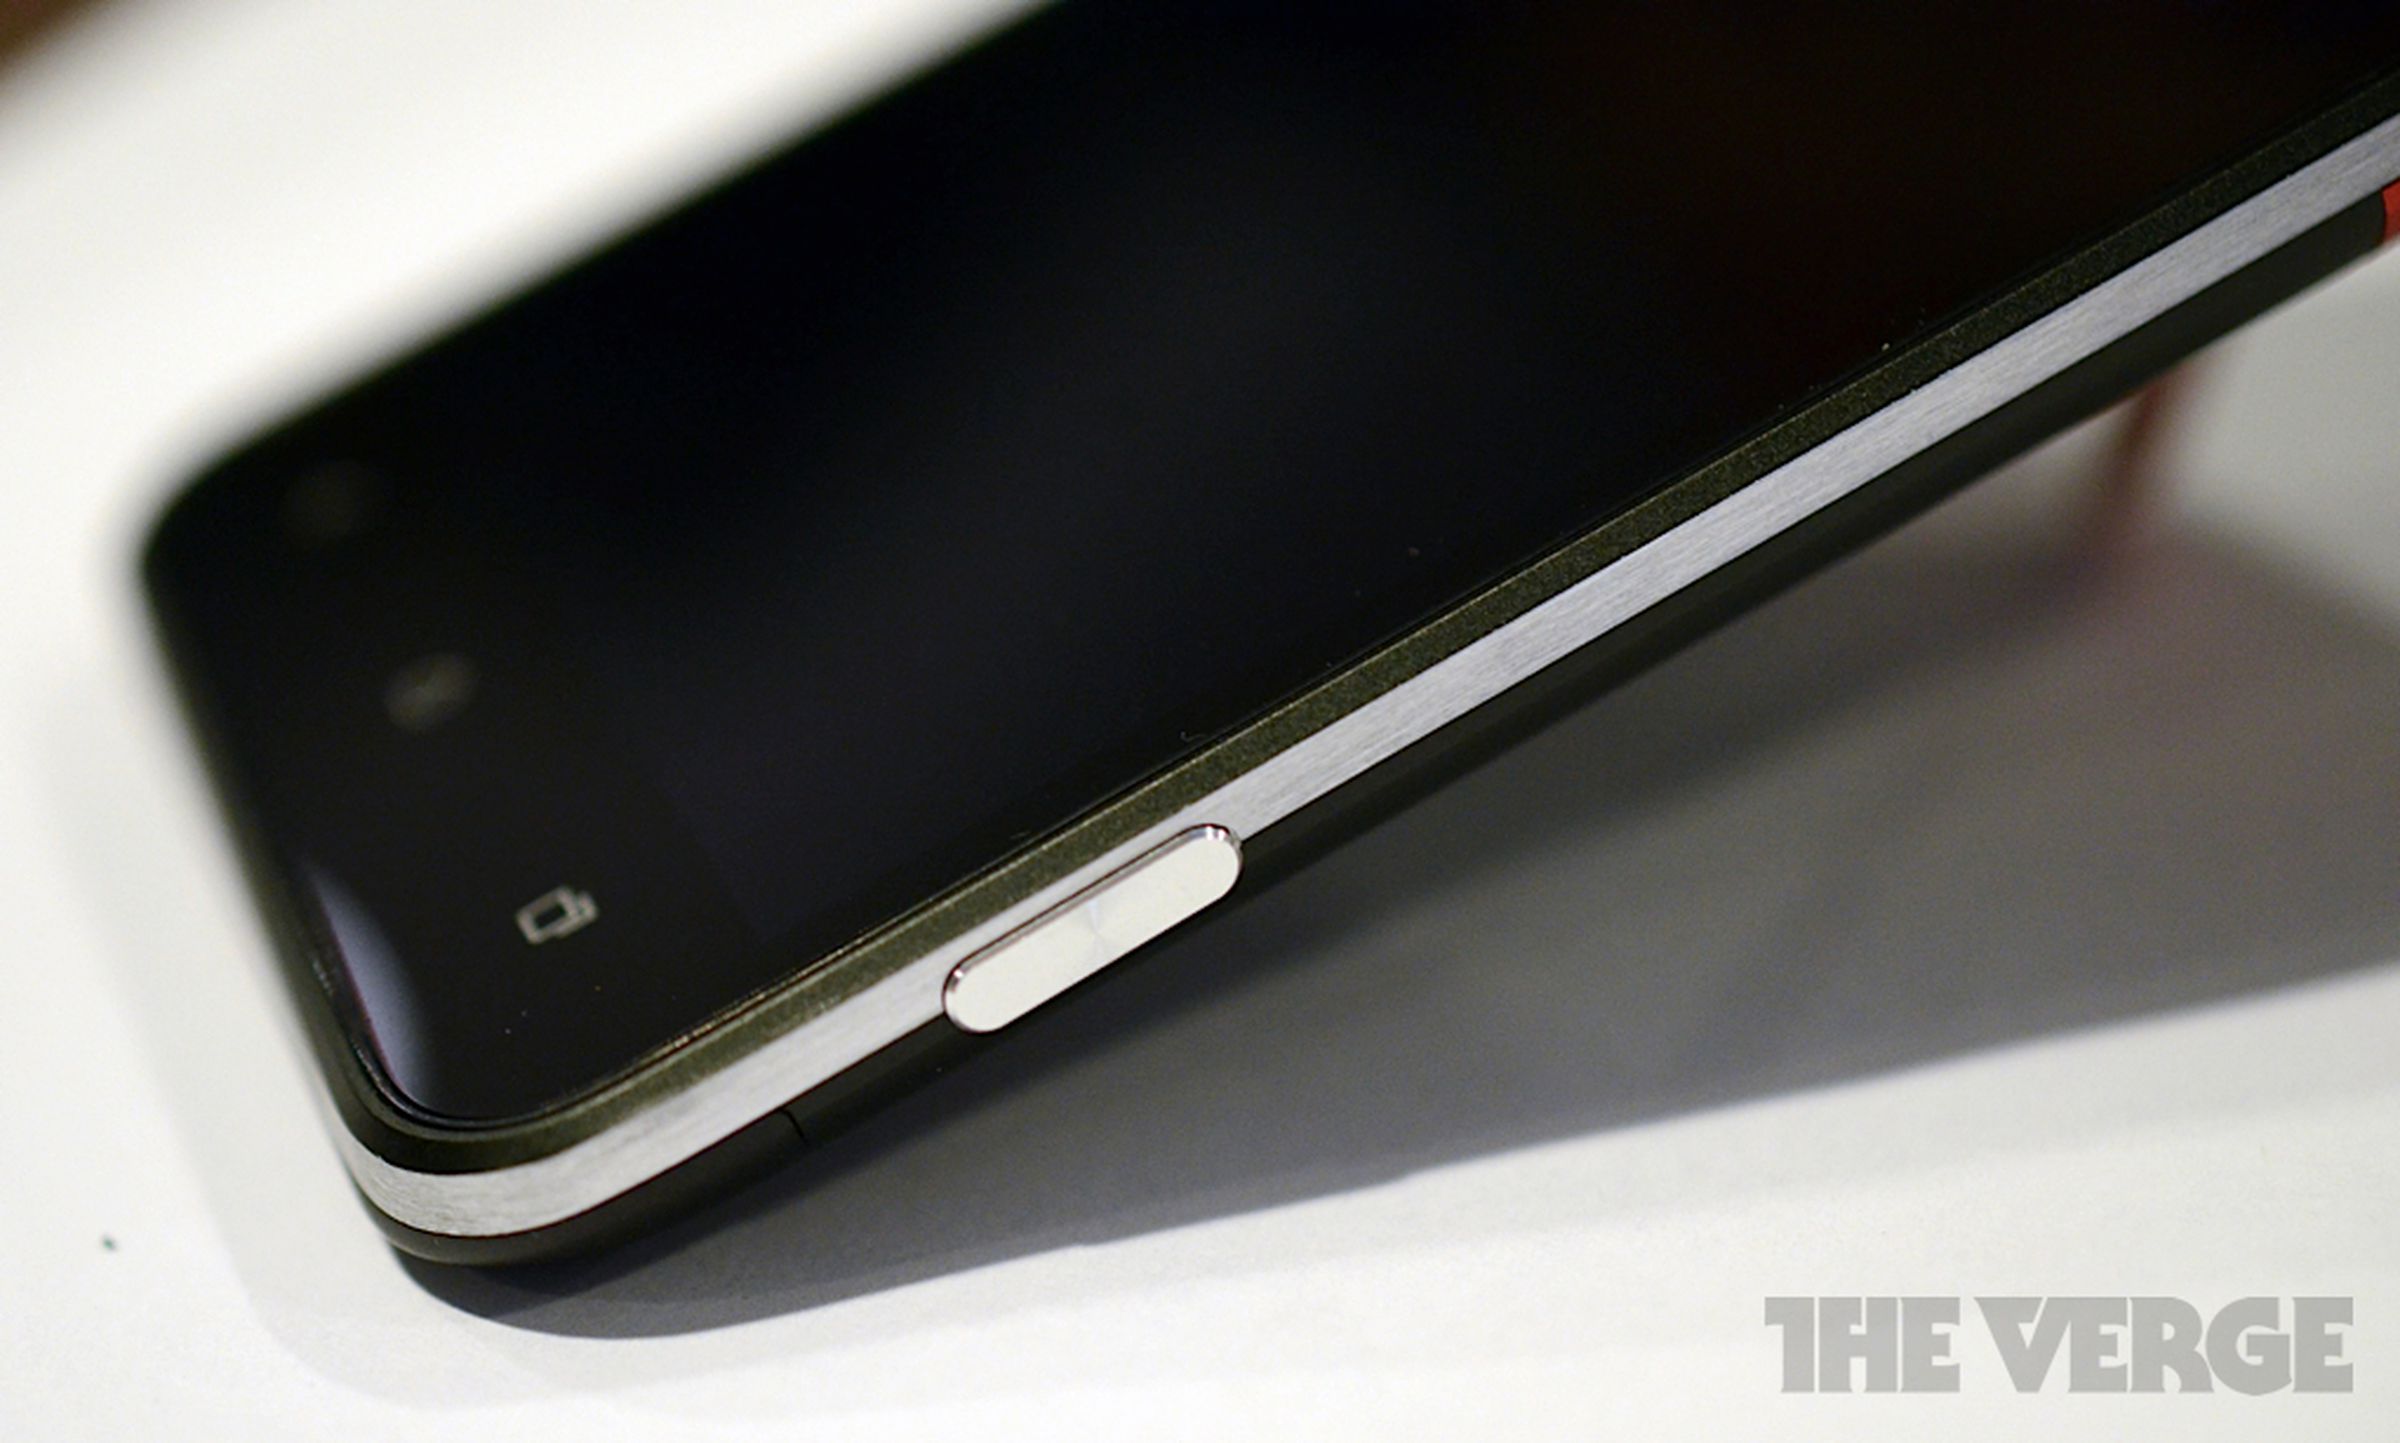 HTC Evo 4G LTE hands-on pictures